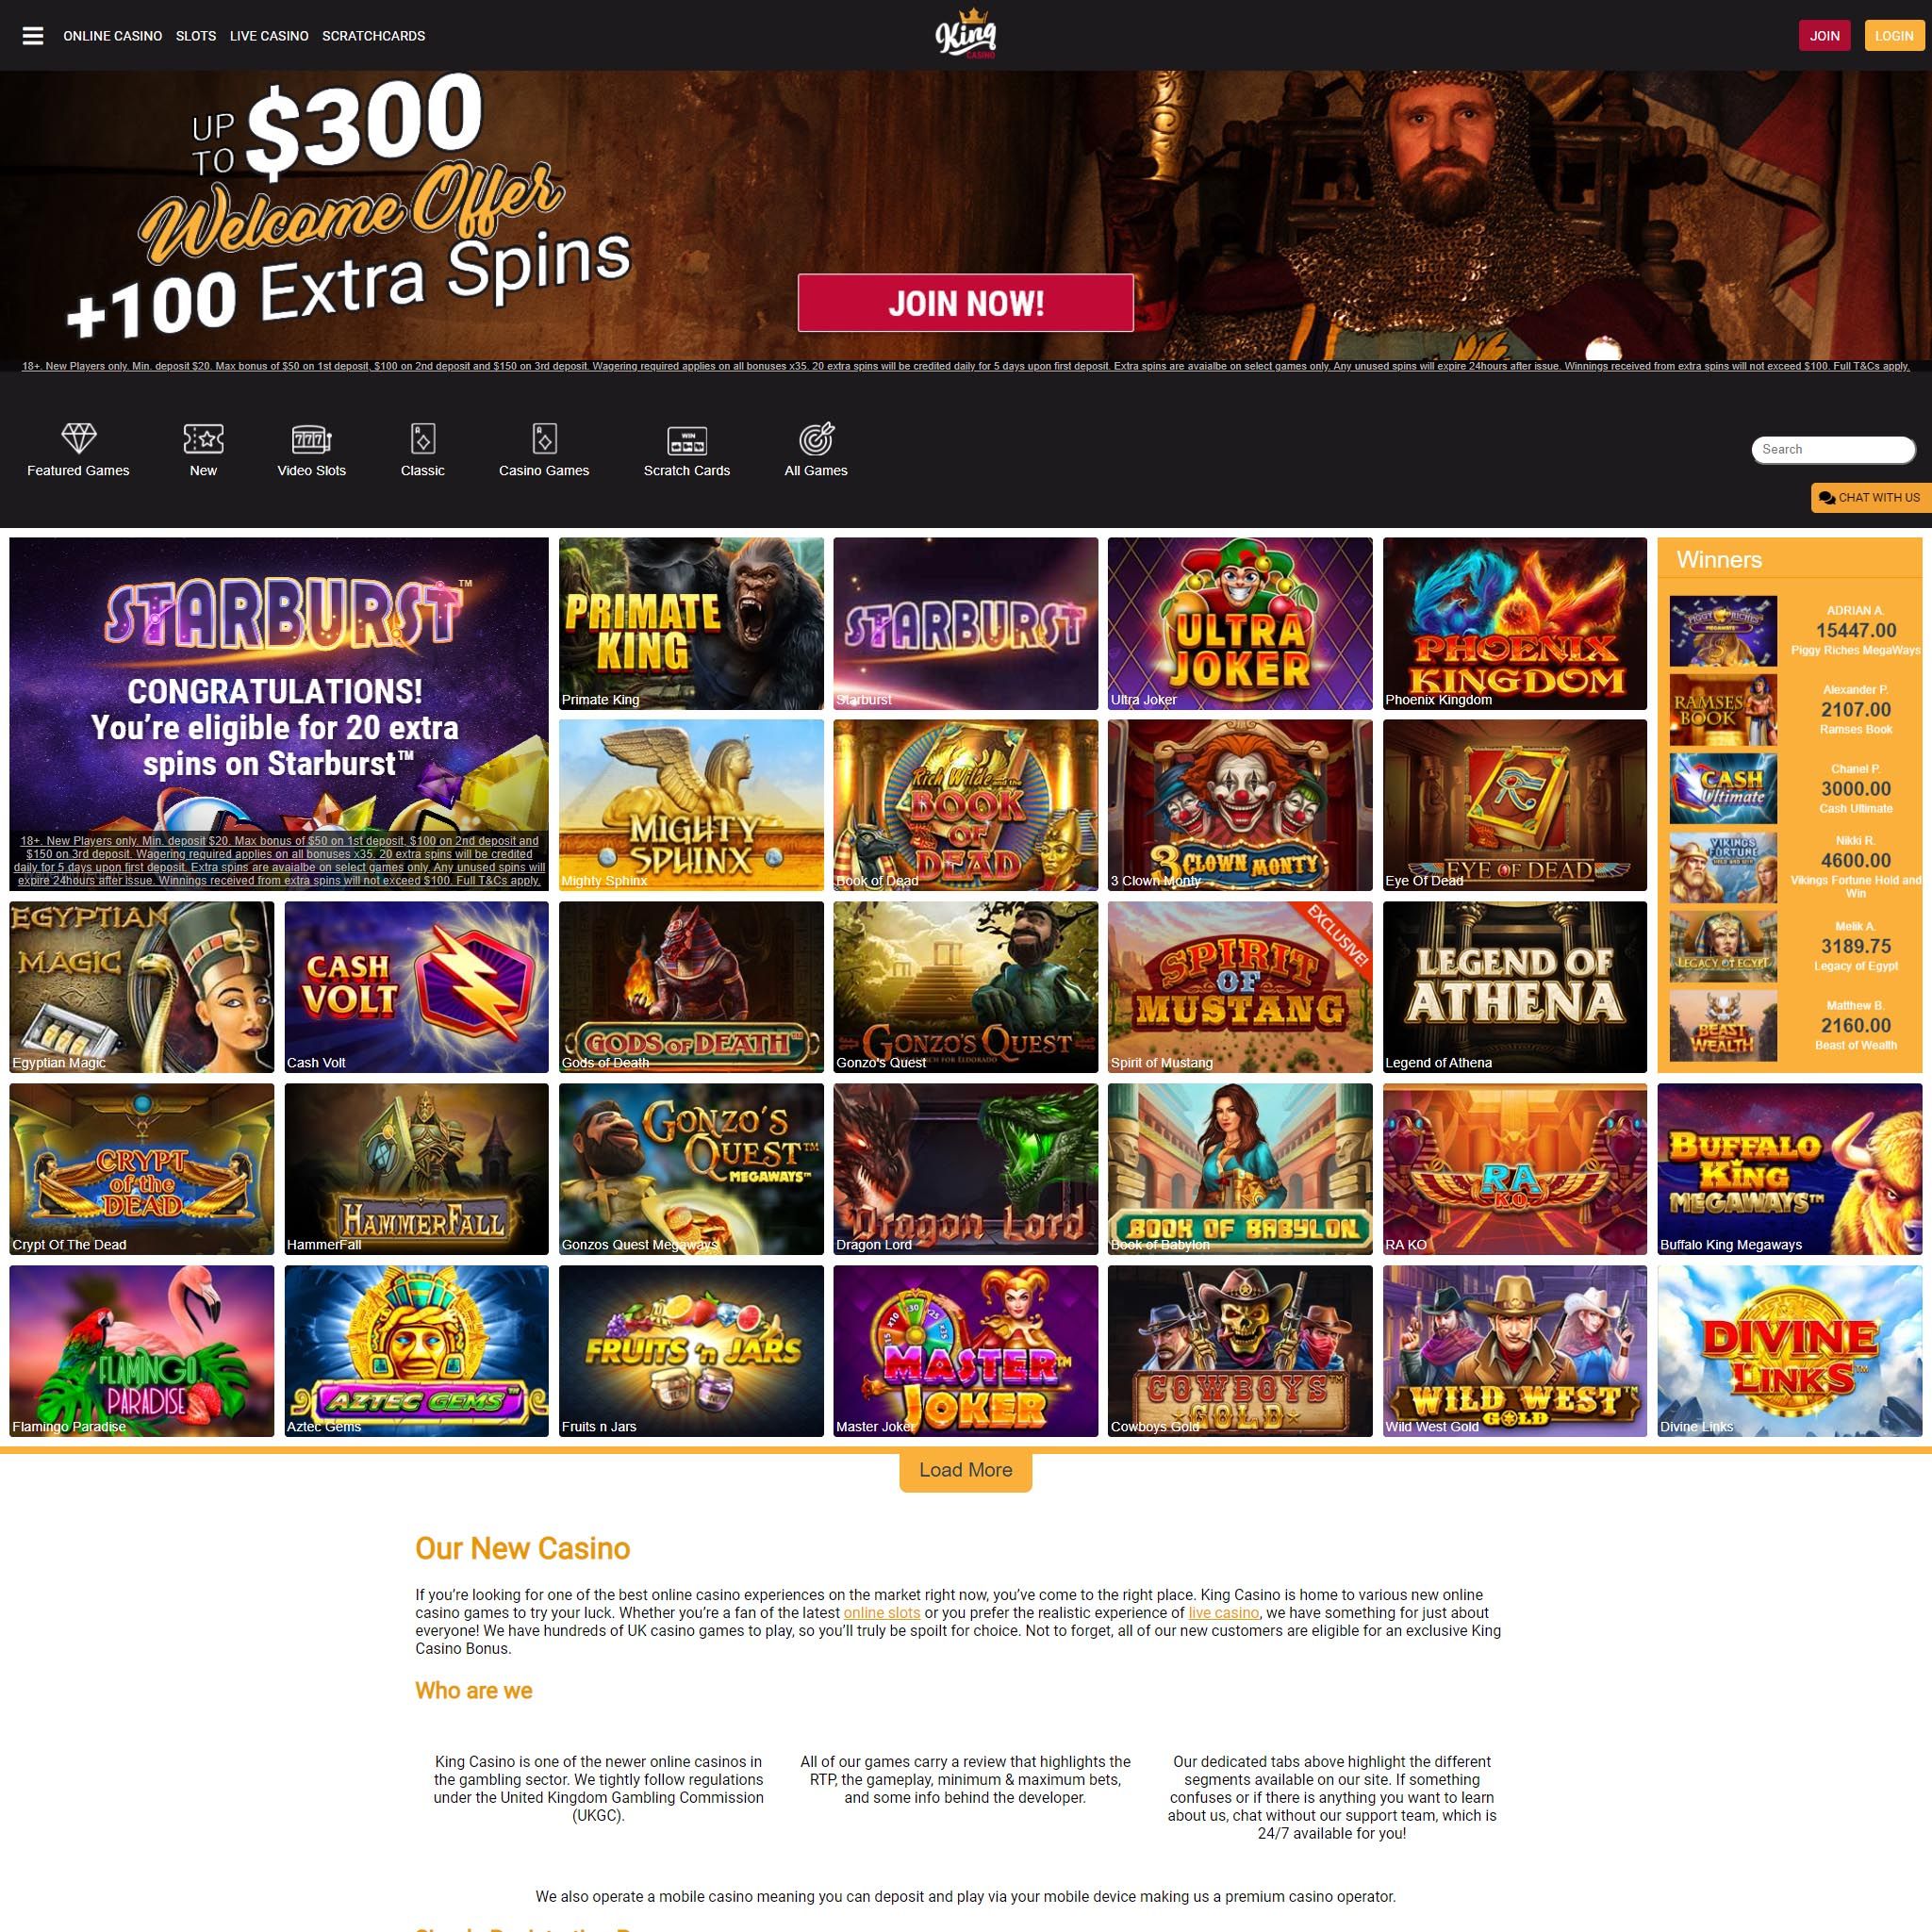 King Casino review by Mr. Gamble